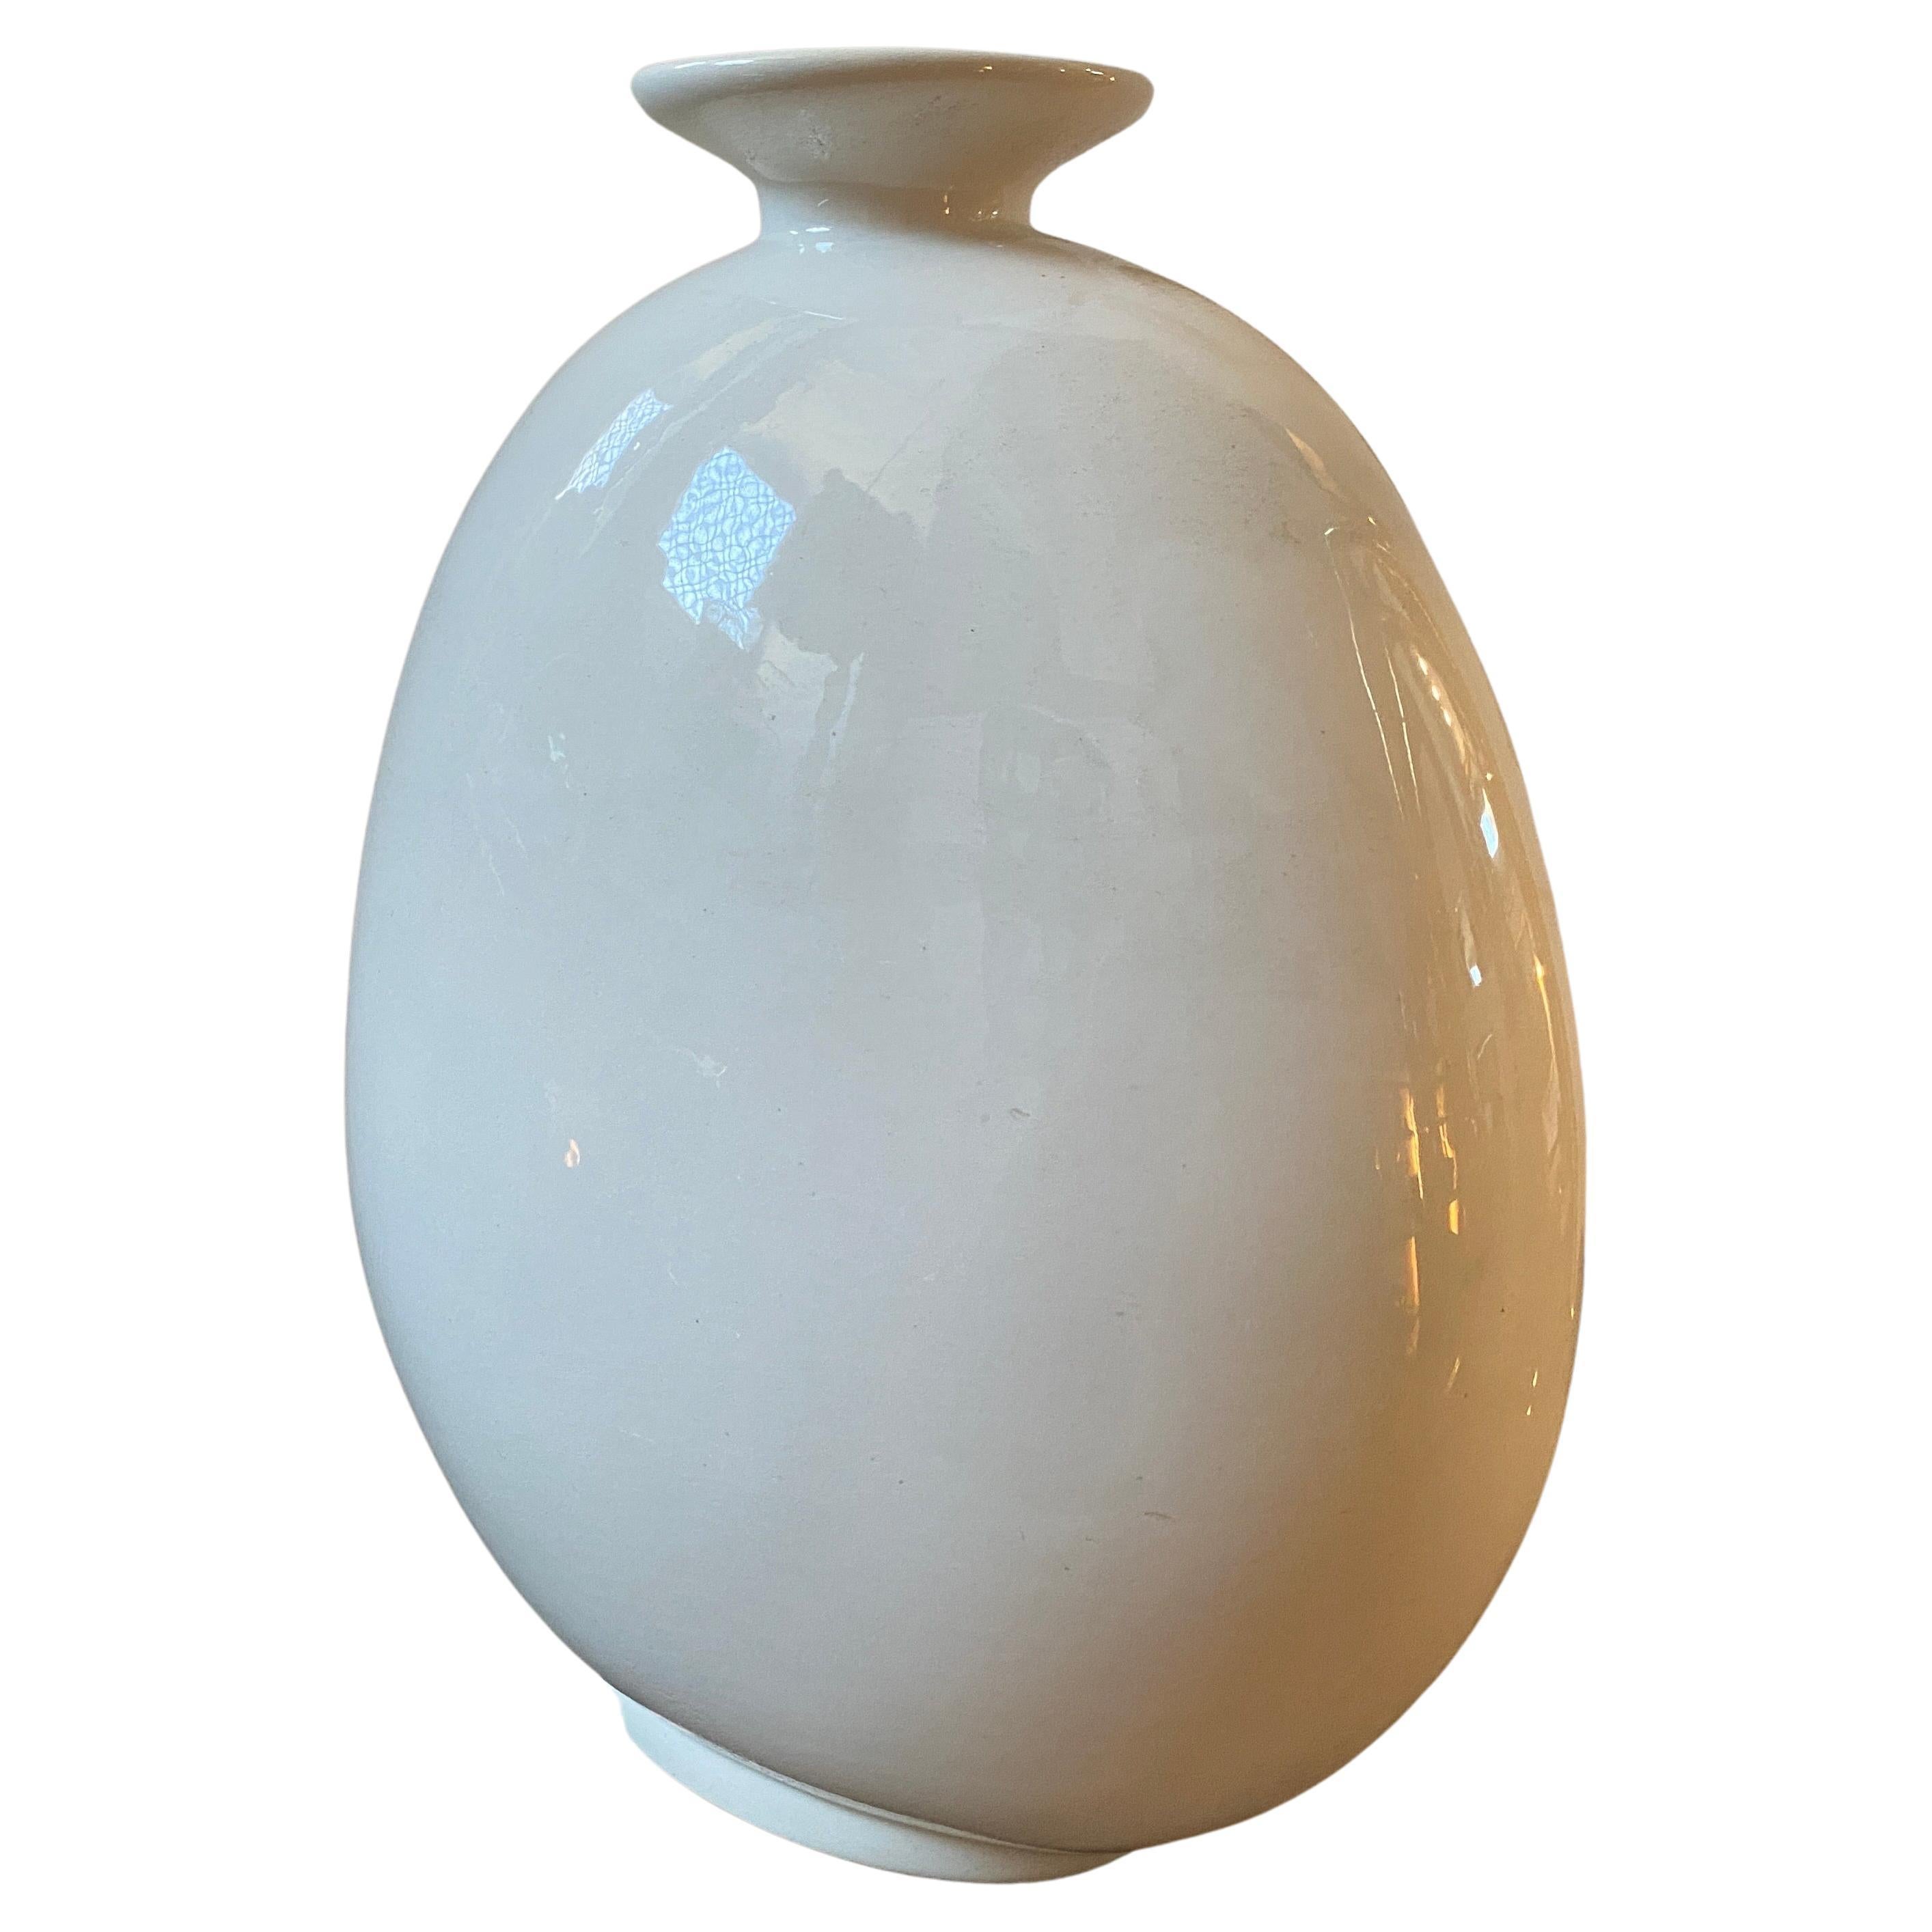 An organic modern white ceramic vase designed and hand-crafted in Italy in the Heighties by Plinio ceramica, it's in perfect conditions.
This Vase by Ceramica Plinio is a timeless expression of Italian design sensibility, blending organic forms with